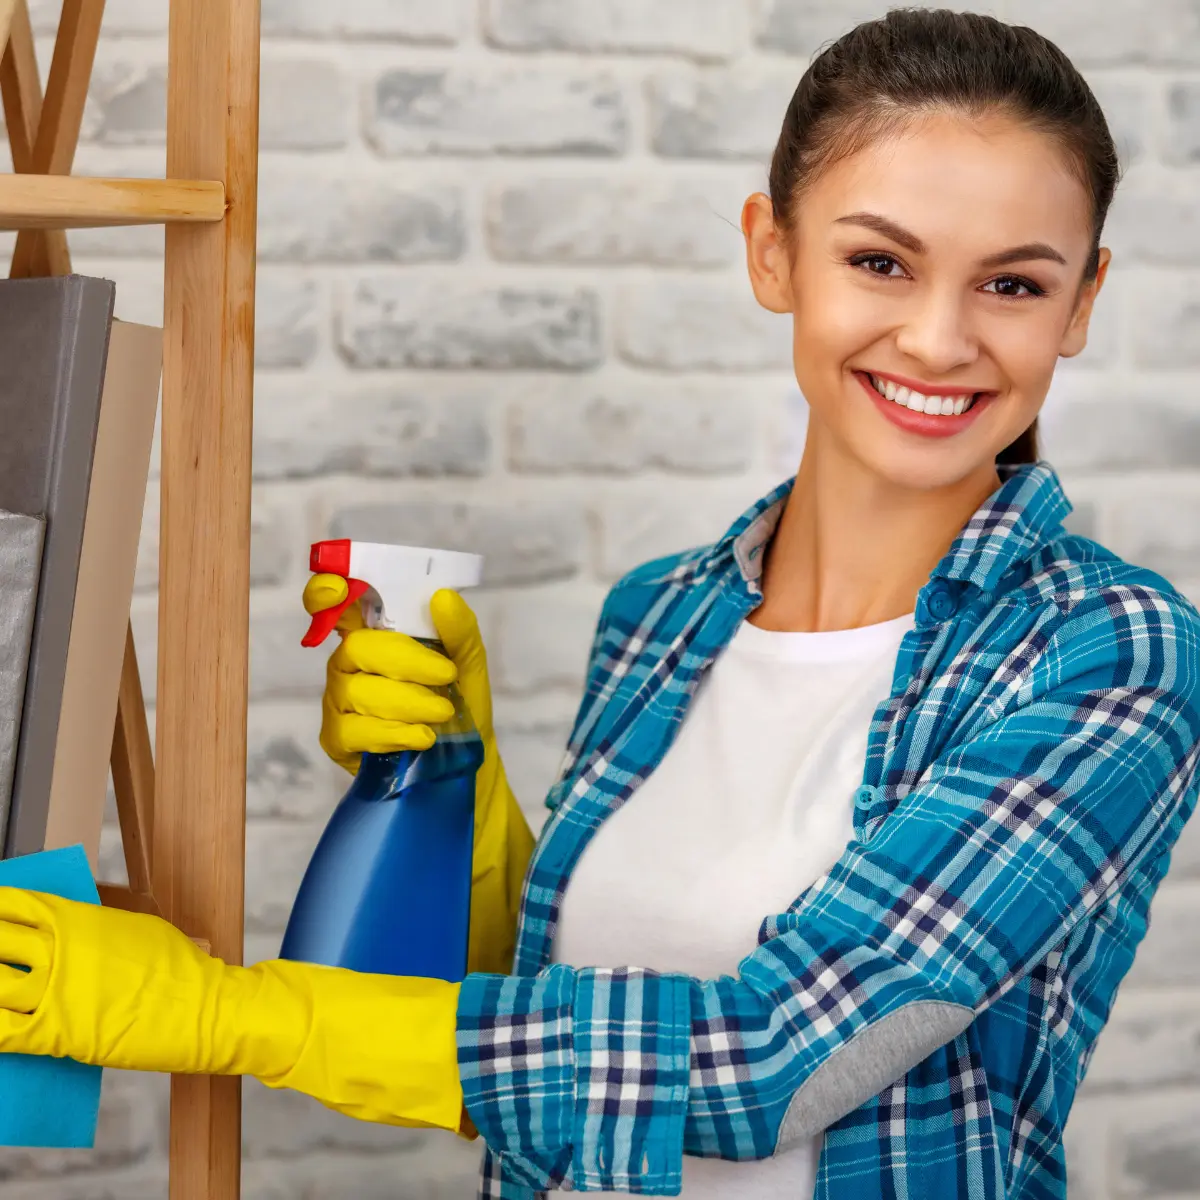 Standard Cleaning Services in Dallas